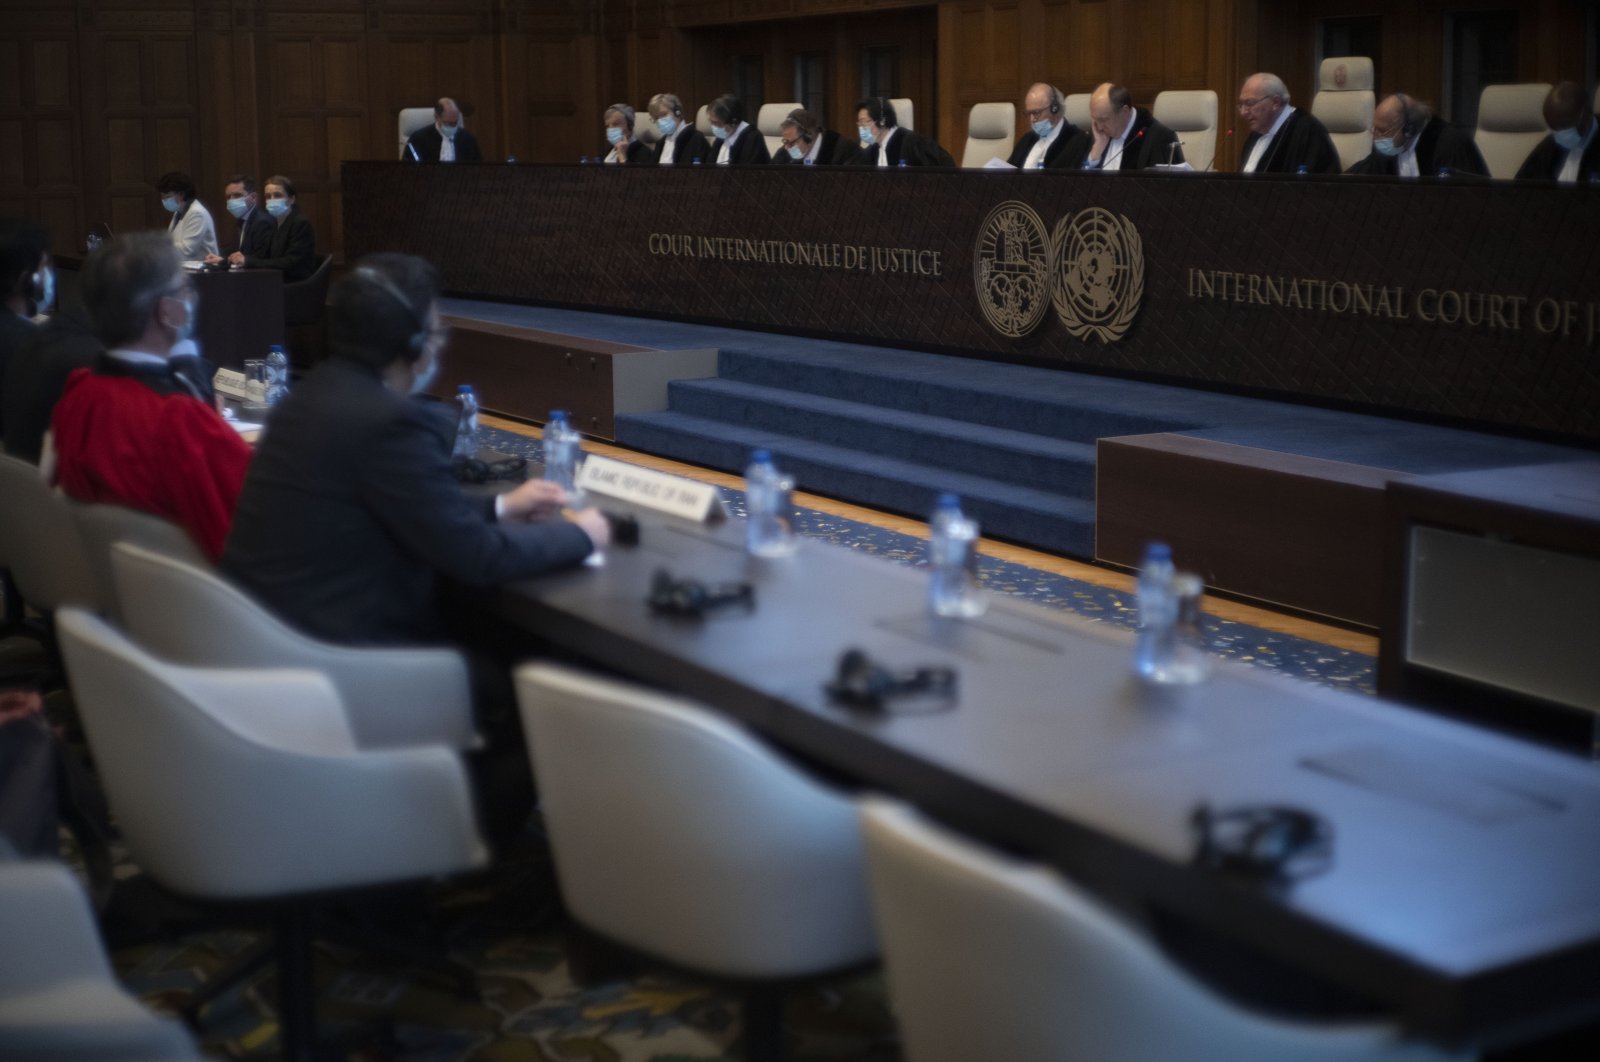 Judge and vice president Kirill Gevorgian of Russia (3rd Right), starts reading the verdict of The International Court of Justice, the United Nations&#039; top court, which issued its judgment in a dispute between Iran and the United States over frozen Iranian state bank accounts worth some $2 billion, in The Hague, Netherlands, March 30, 2023. (AP Photo)